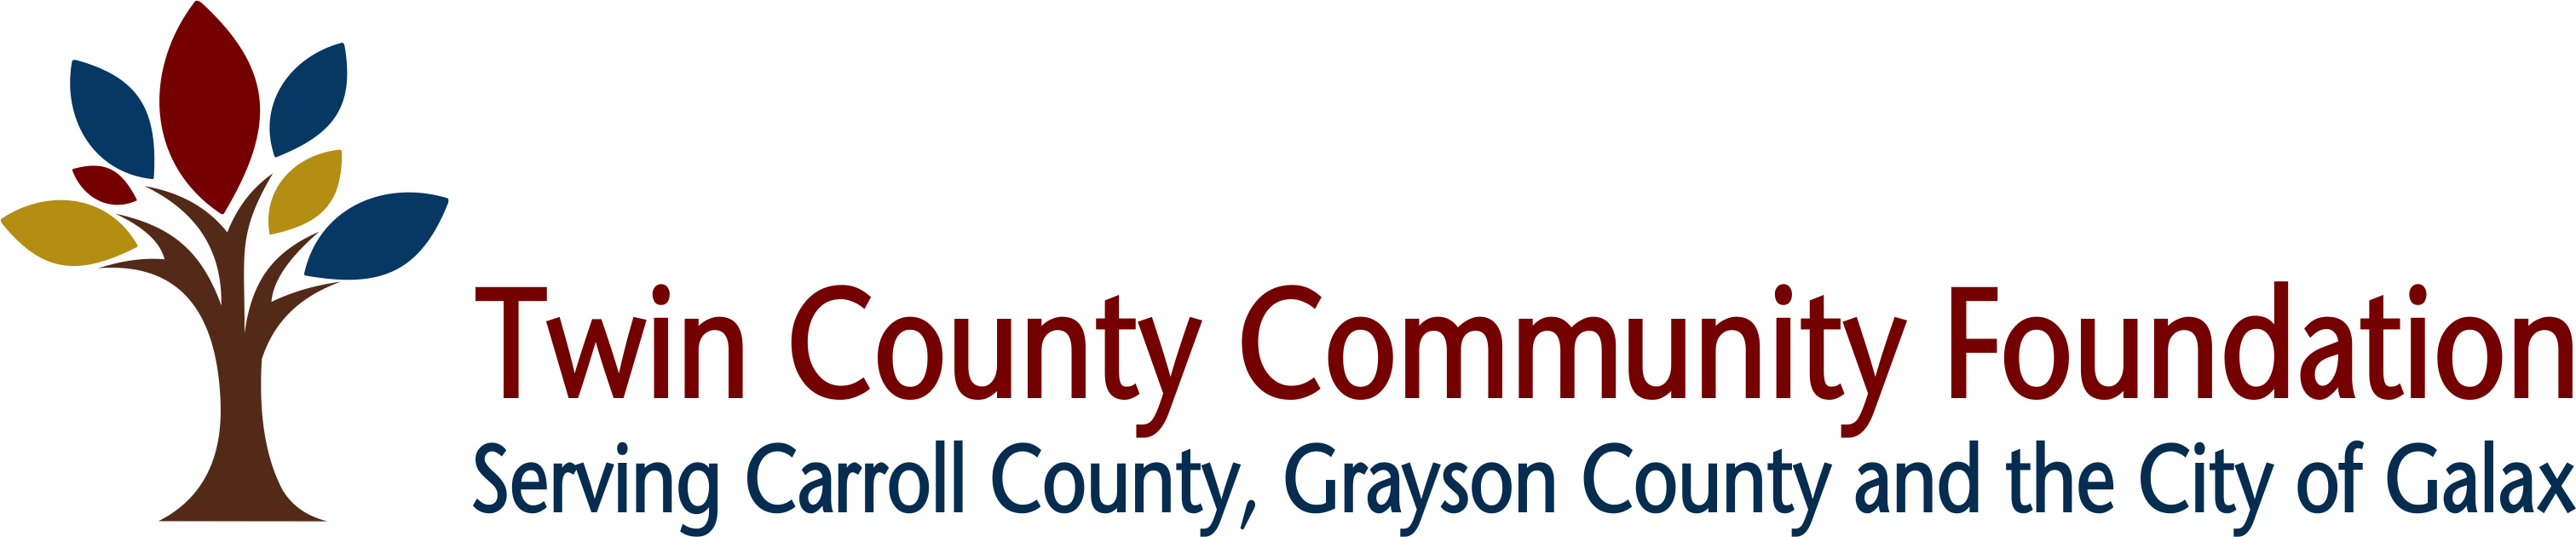 Children’s Trust Receives Twin County Community Foundation Grant ...